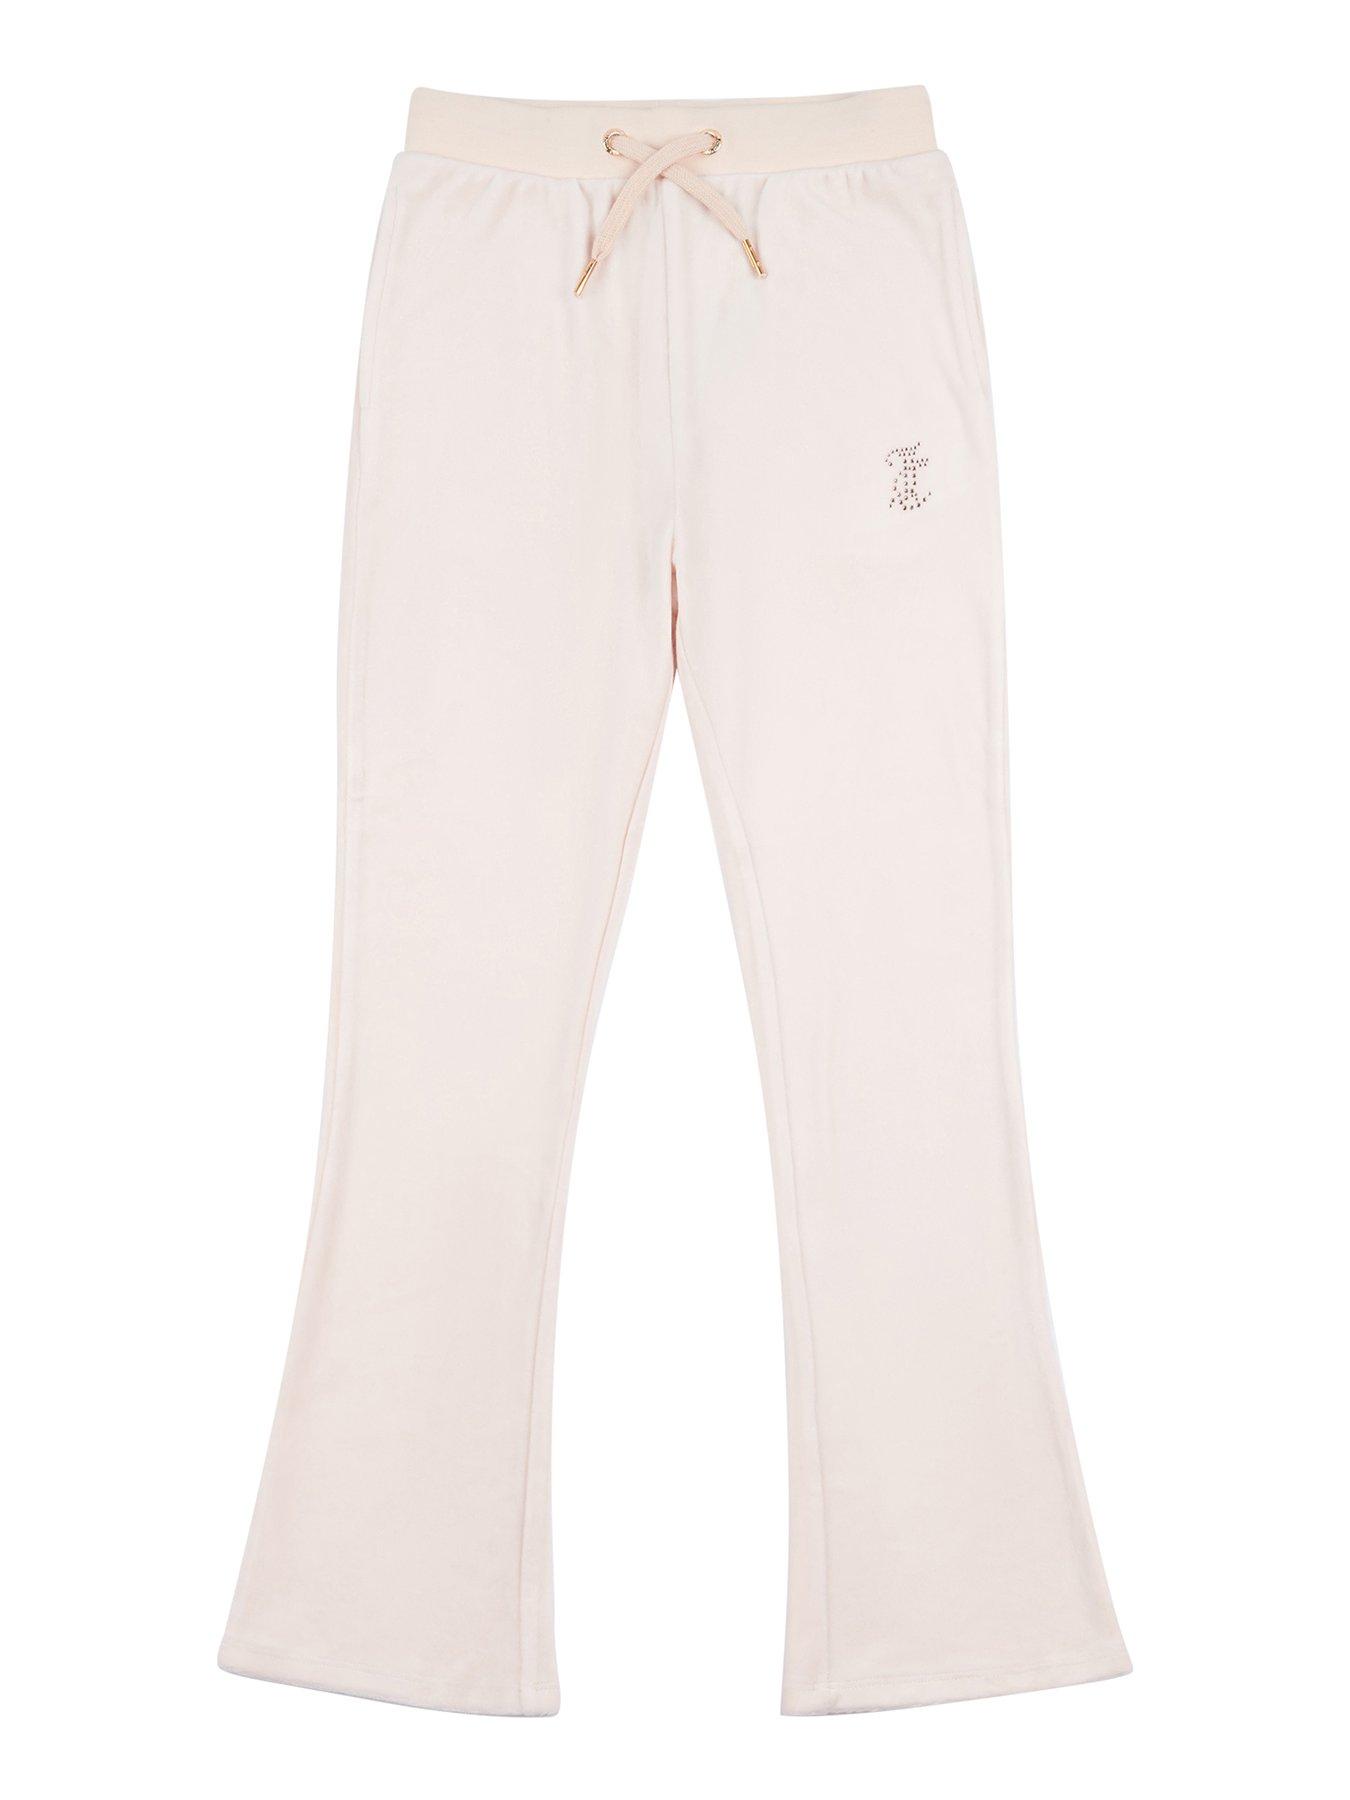 Juicy Couture - Juicy Couture Ice Pink Flare Trackpants on